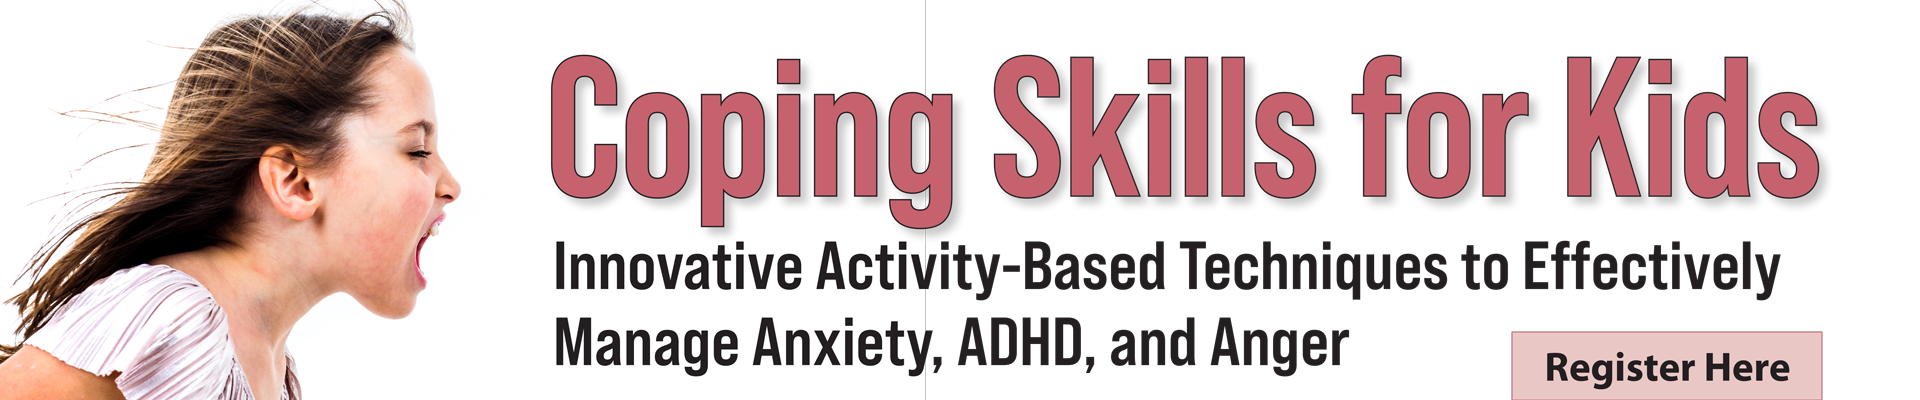 Coping Skills for Kids: Innovative Activity-Based Techniques to Effectively Manage Anxiety, ADHD, and Anger